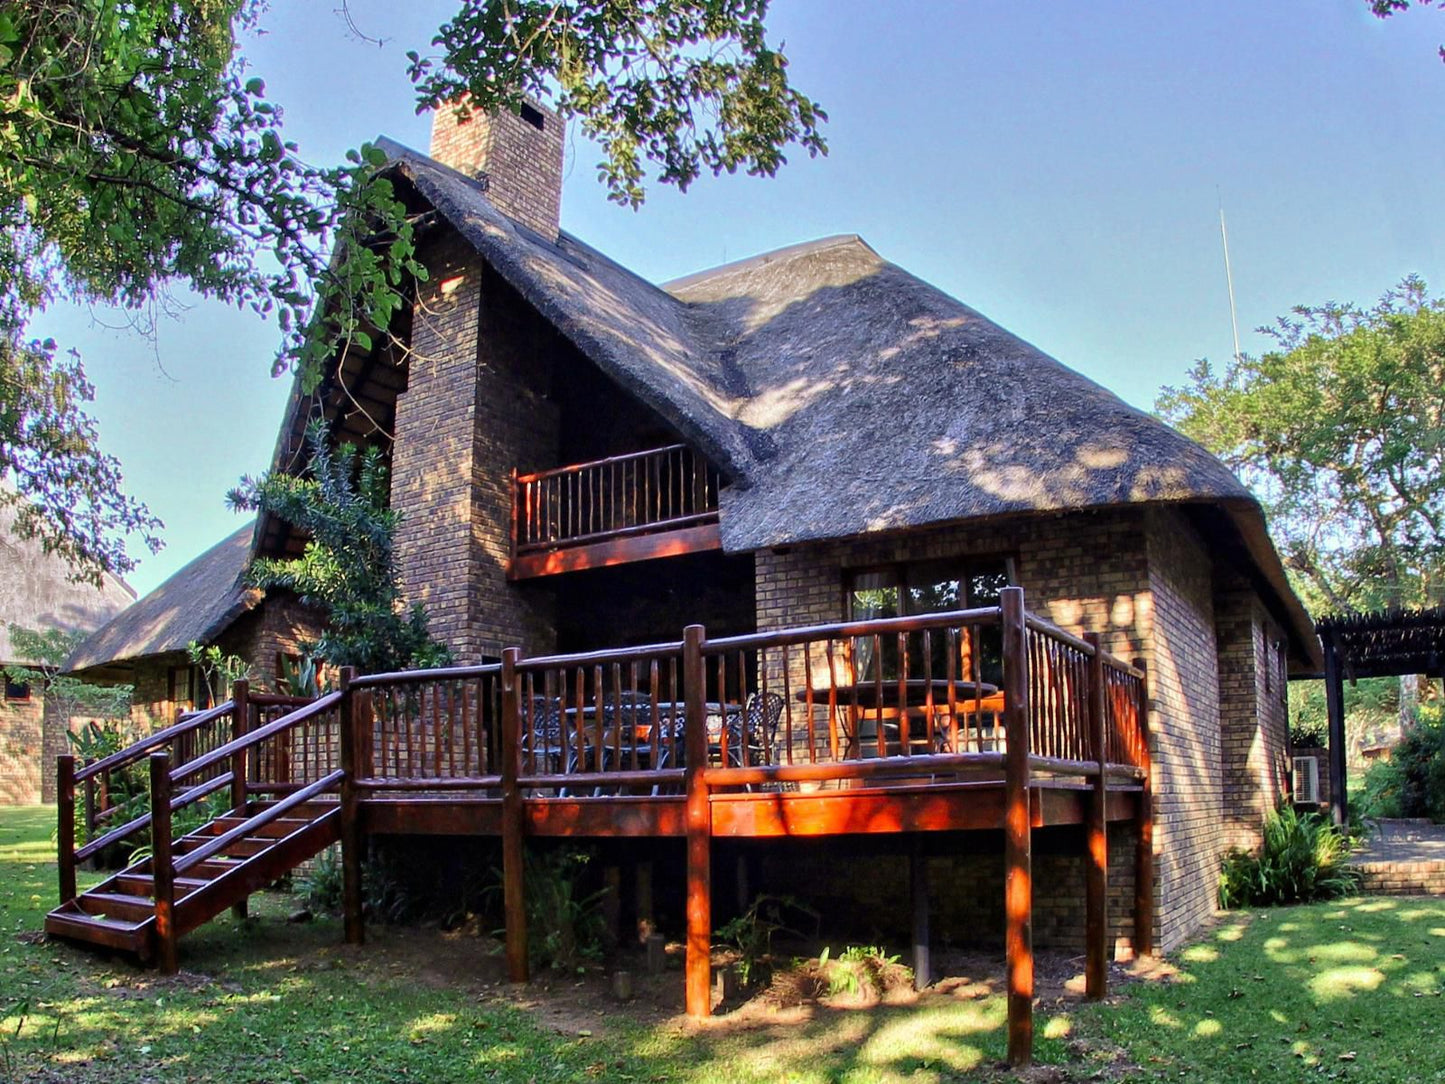 Cambalala Kruger Park Lodge Luxury Self Catering Unit Hazyview Mpumalanga South Africa Complementary Colors, Building, Architecture